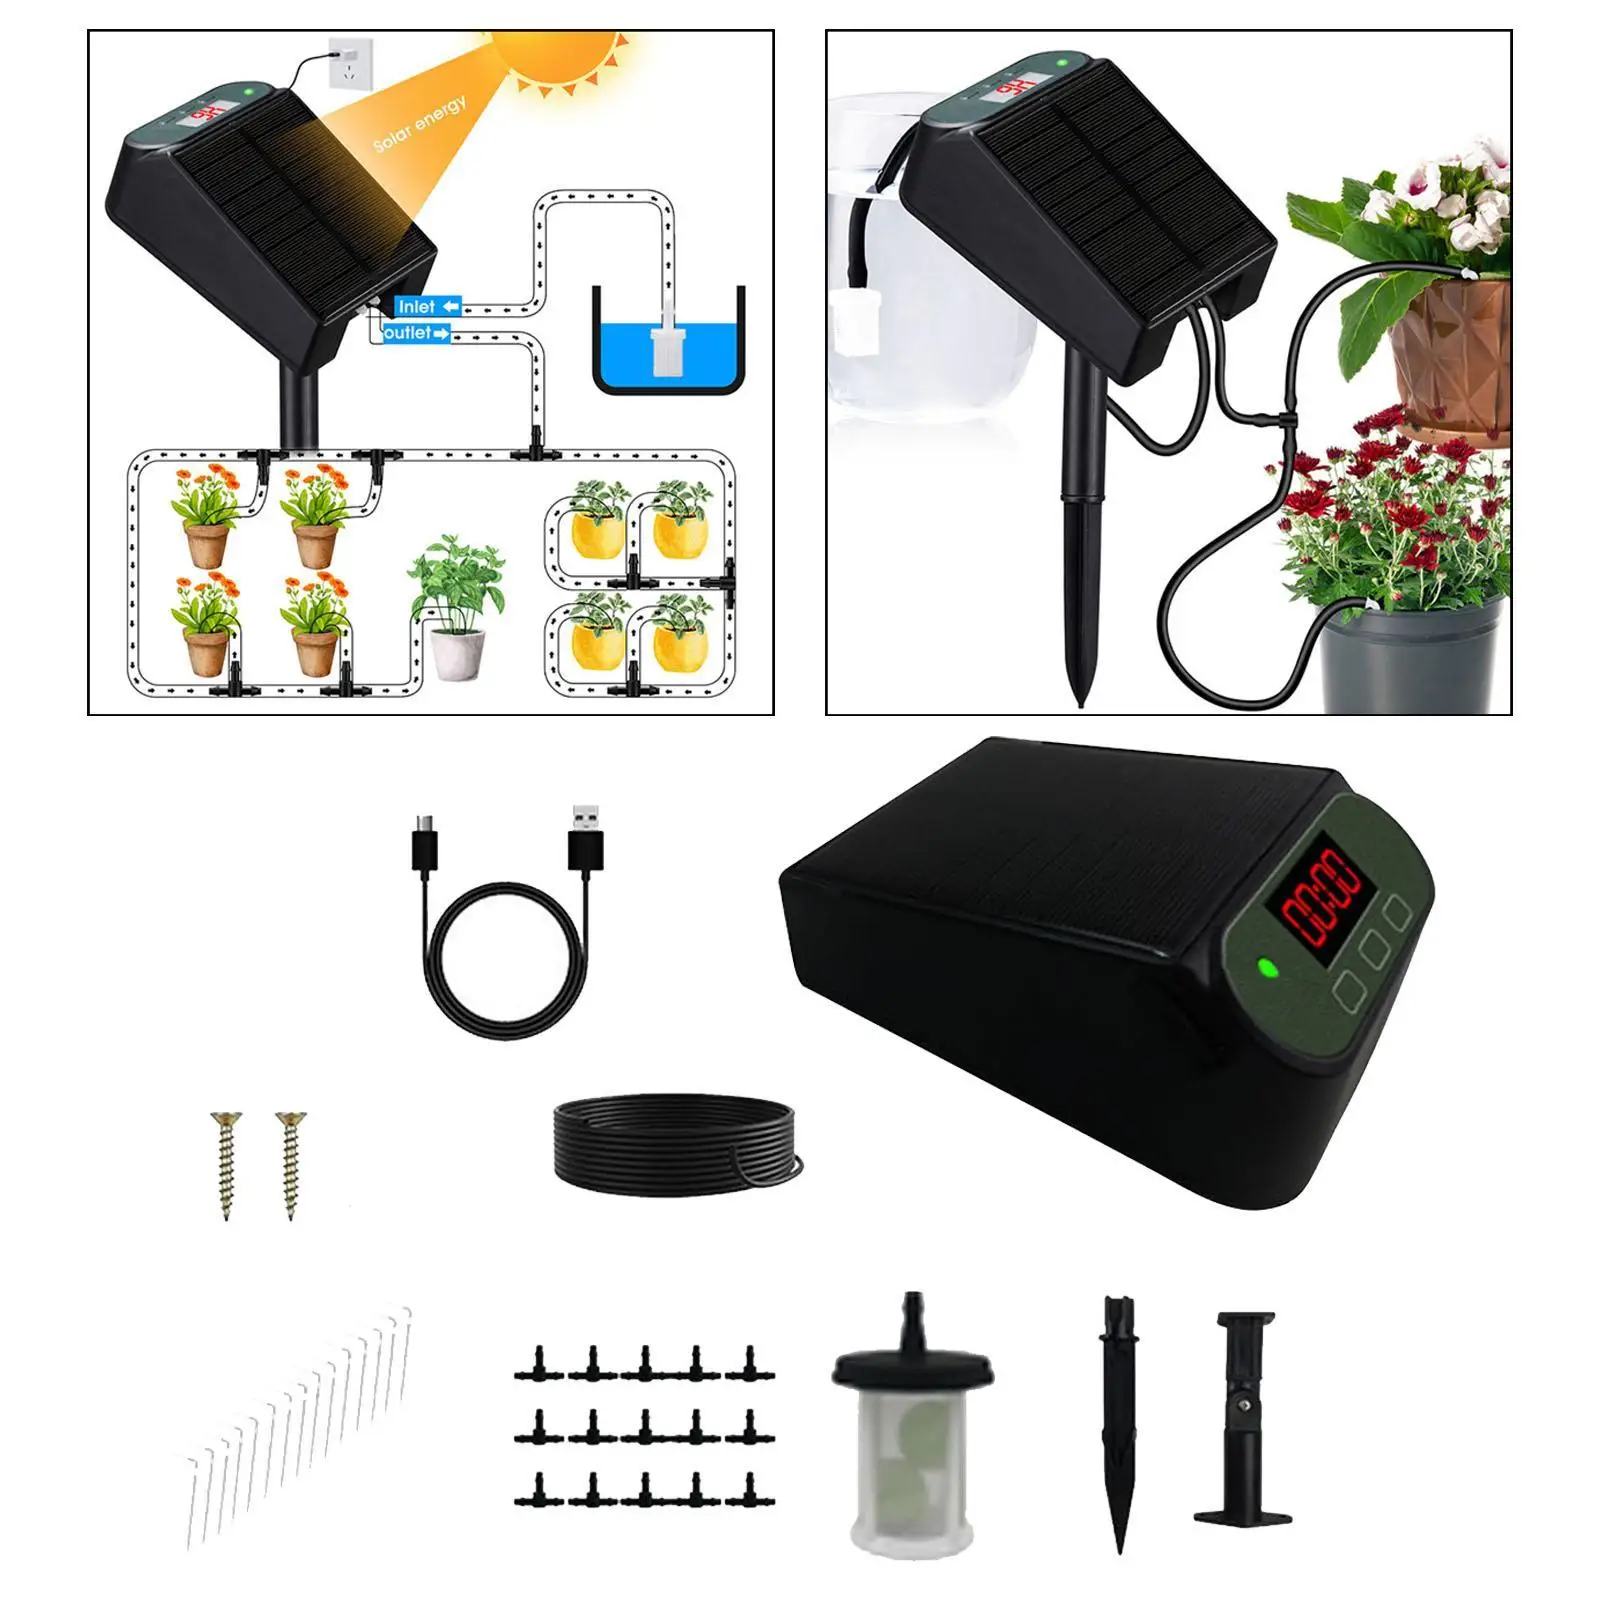 

Solar Powered Drip Irrigation Pump Kit Vegetables Versatile Timer Modes Yard Indoor Outdoor Flowers Patio Plant Watering Device